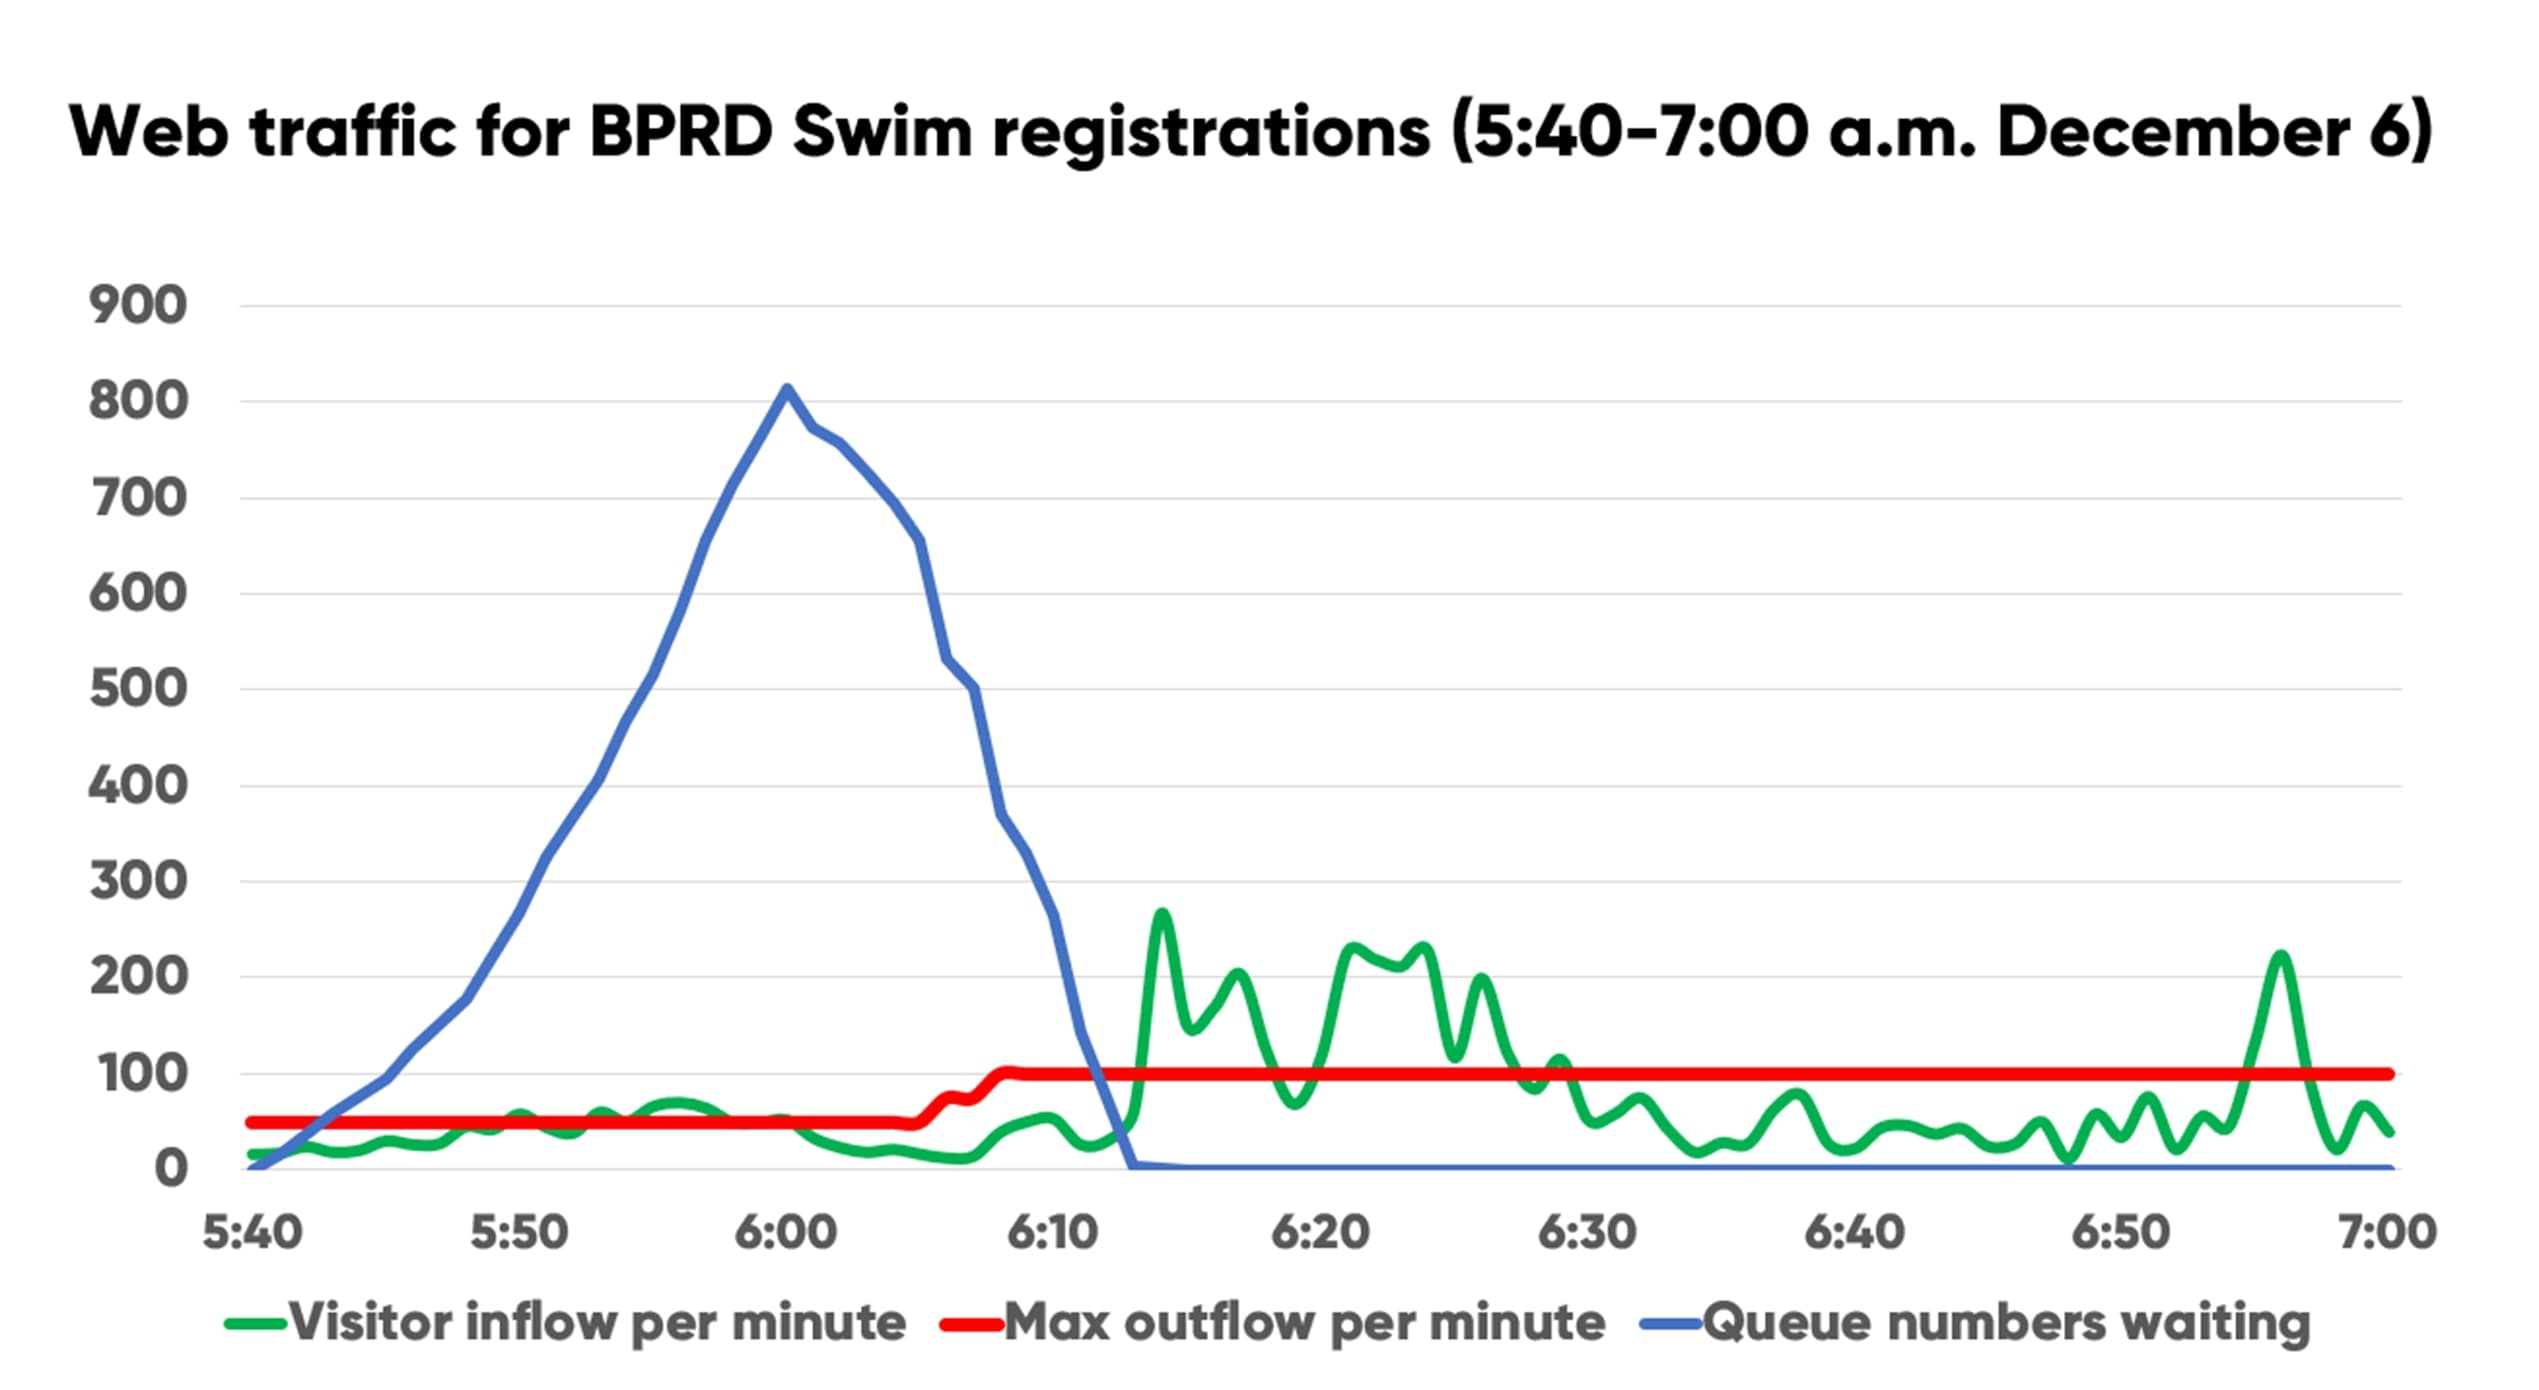 Chart showing inflow of patrons to BPRD's website and waiting room